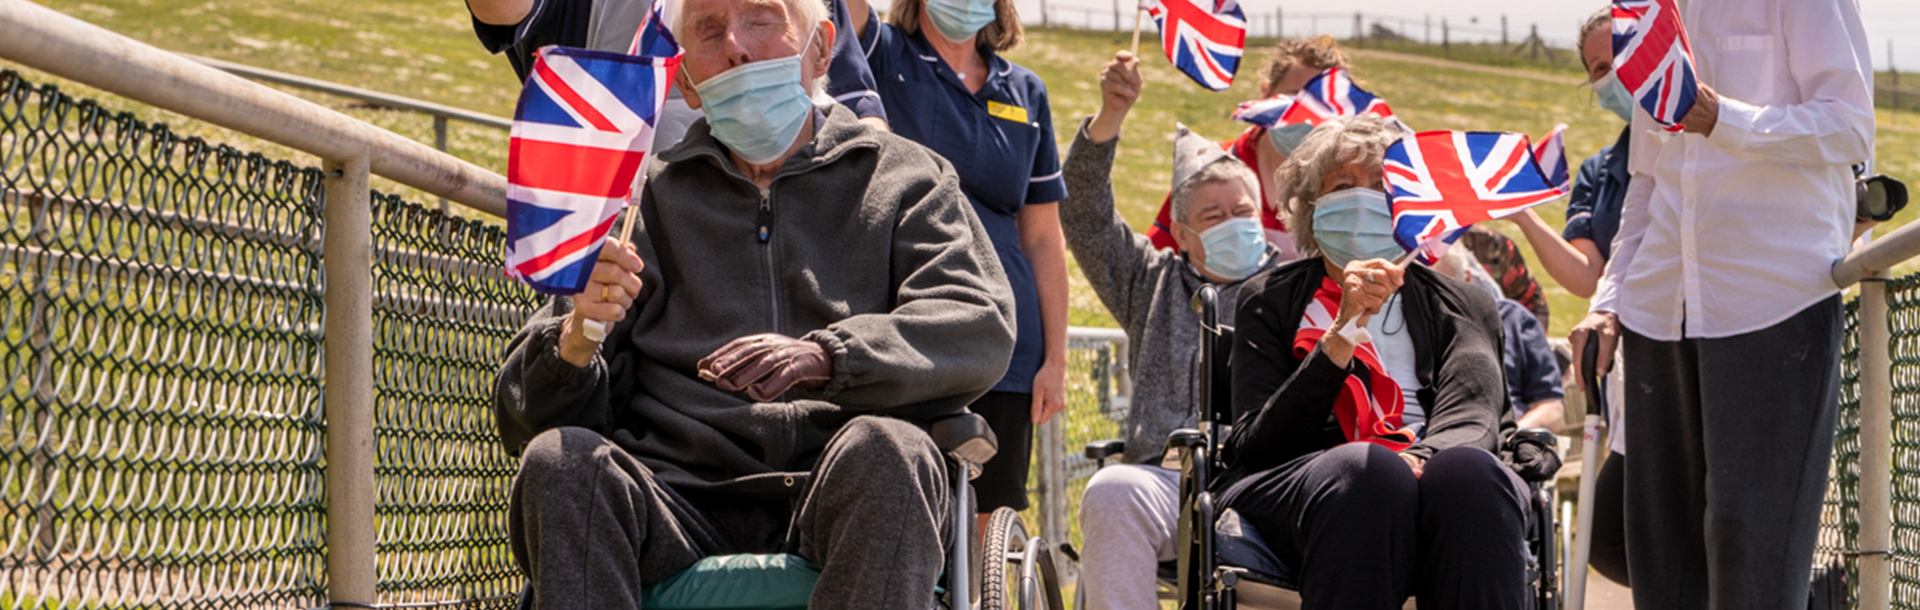 photo of a group of blind veterans celebrating VE day holding Union Jack flags and wearing face masks